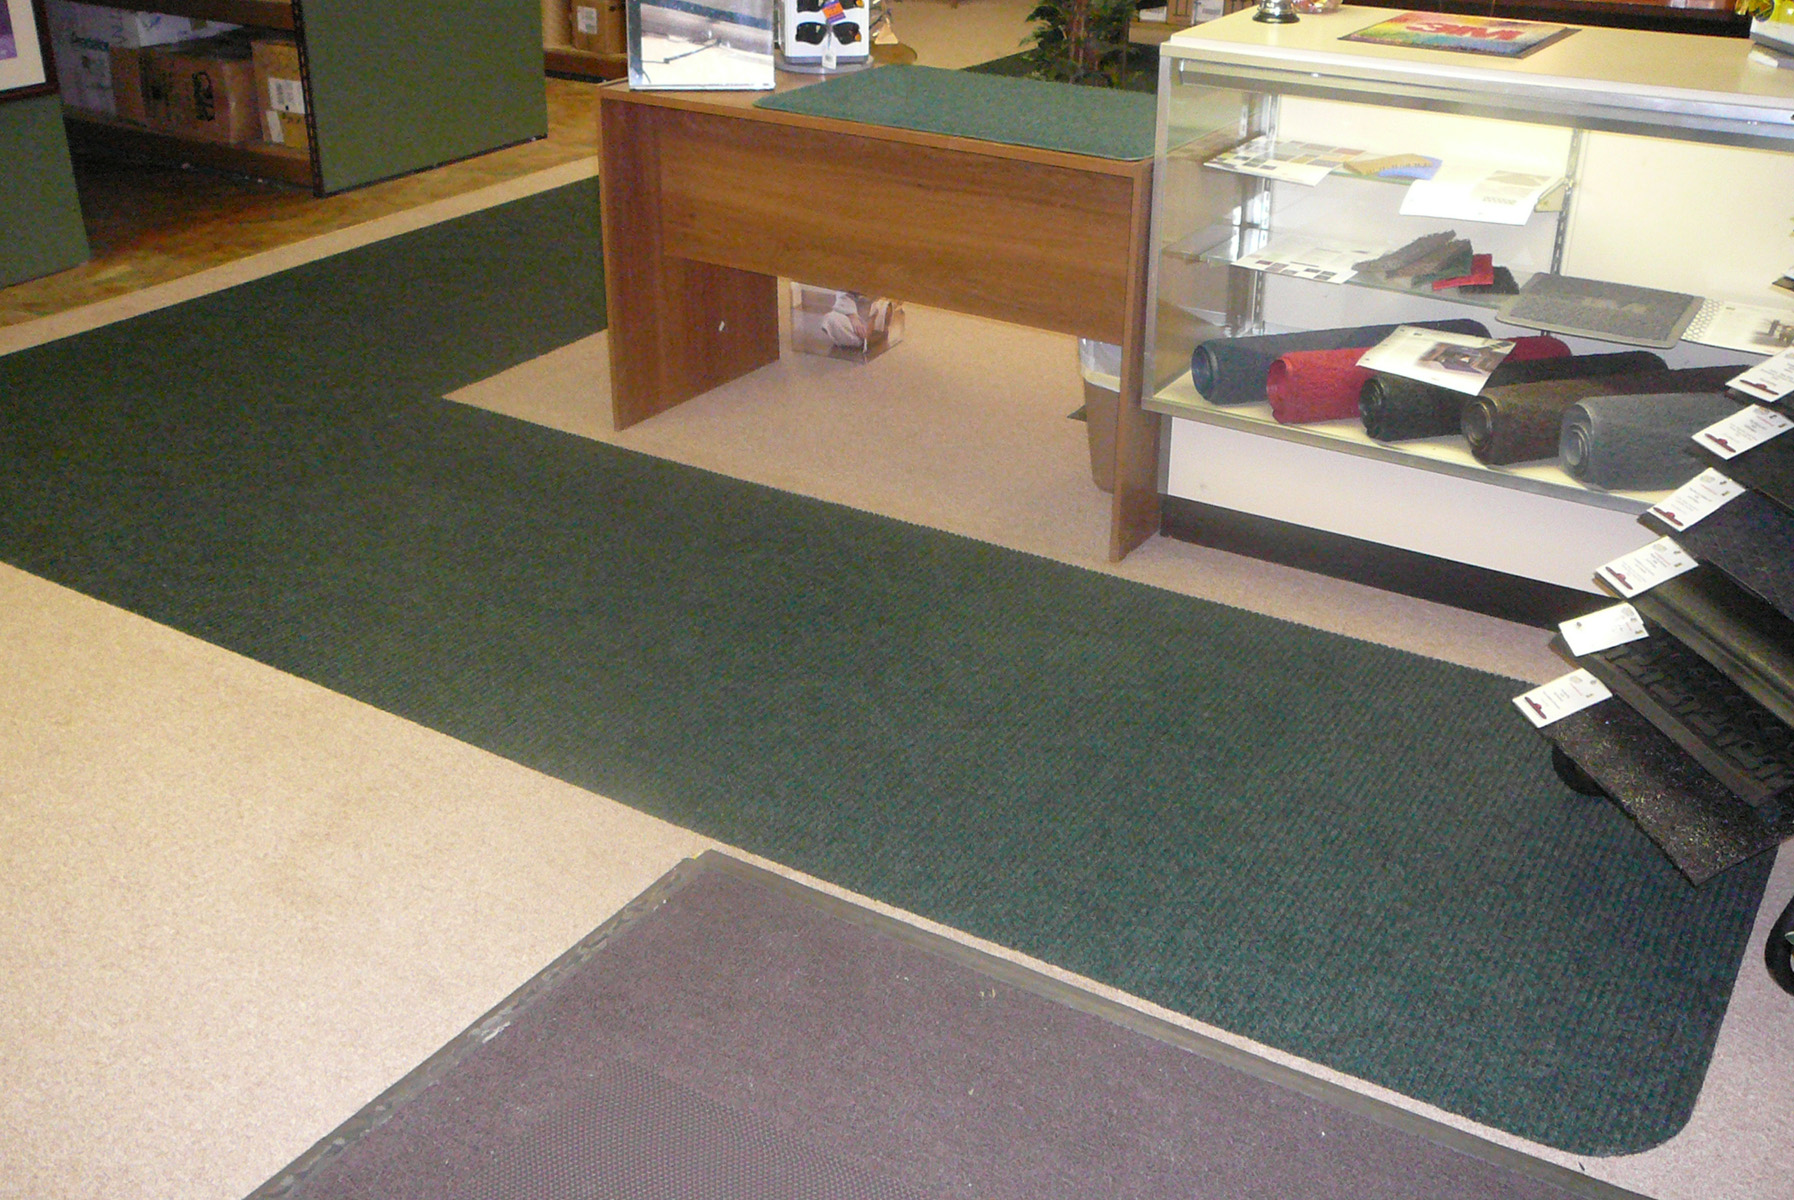 New Under Carpet Or Rug Heated Floor Systems Warm And Dry Wet Floors